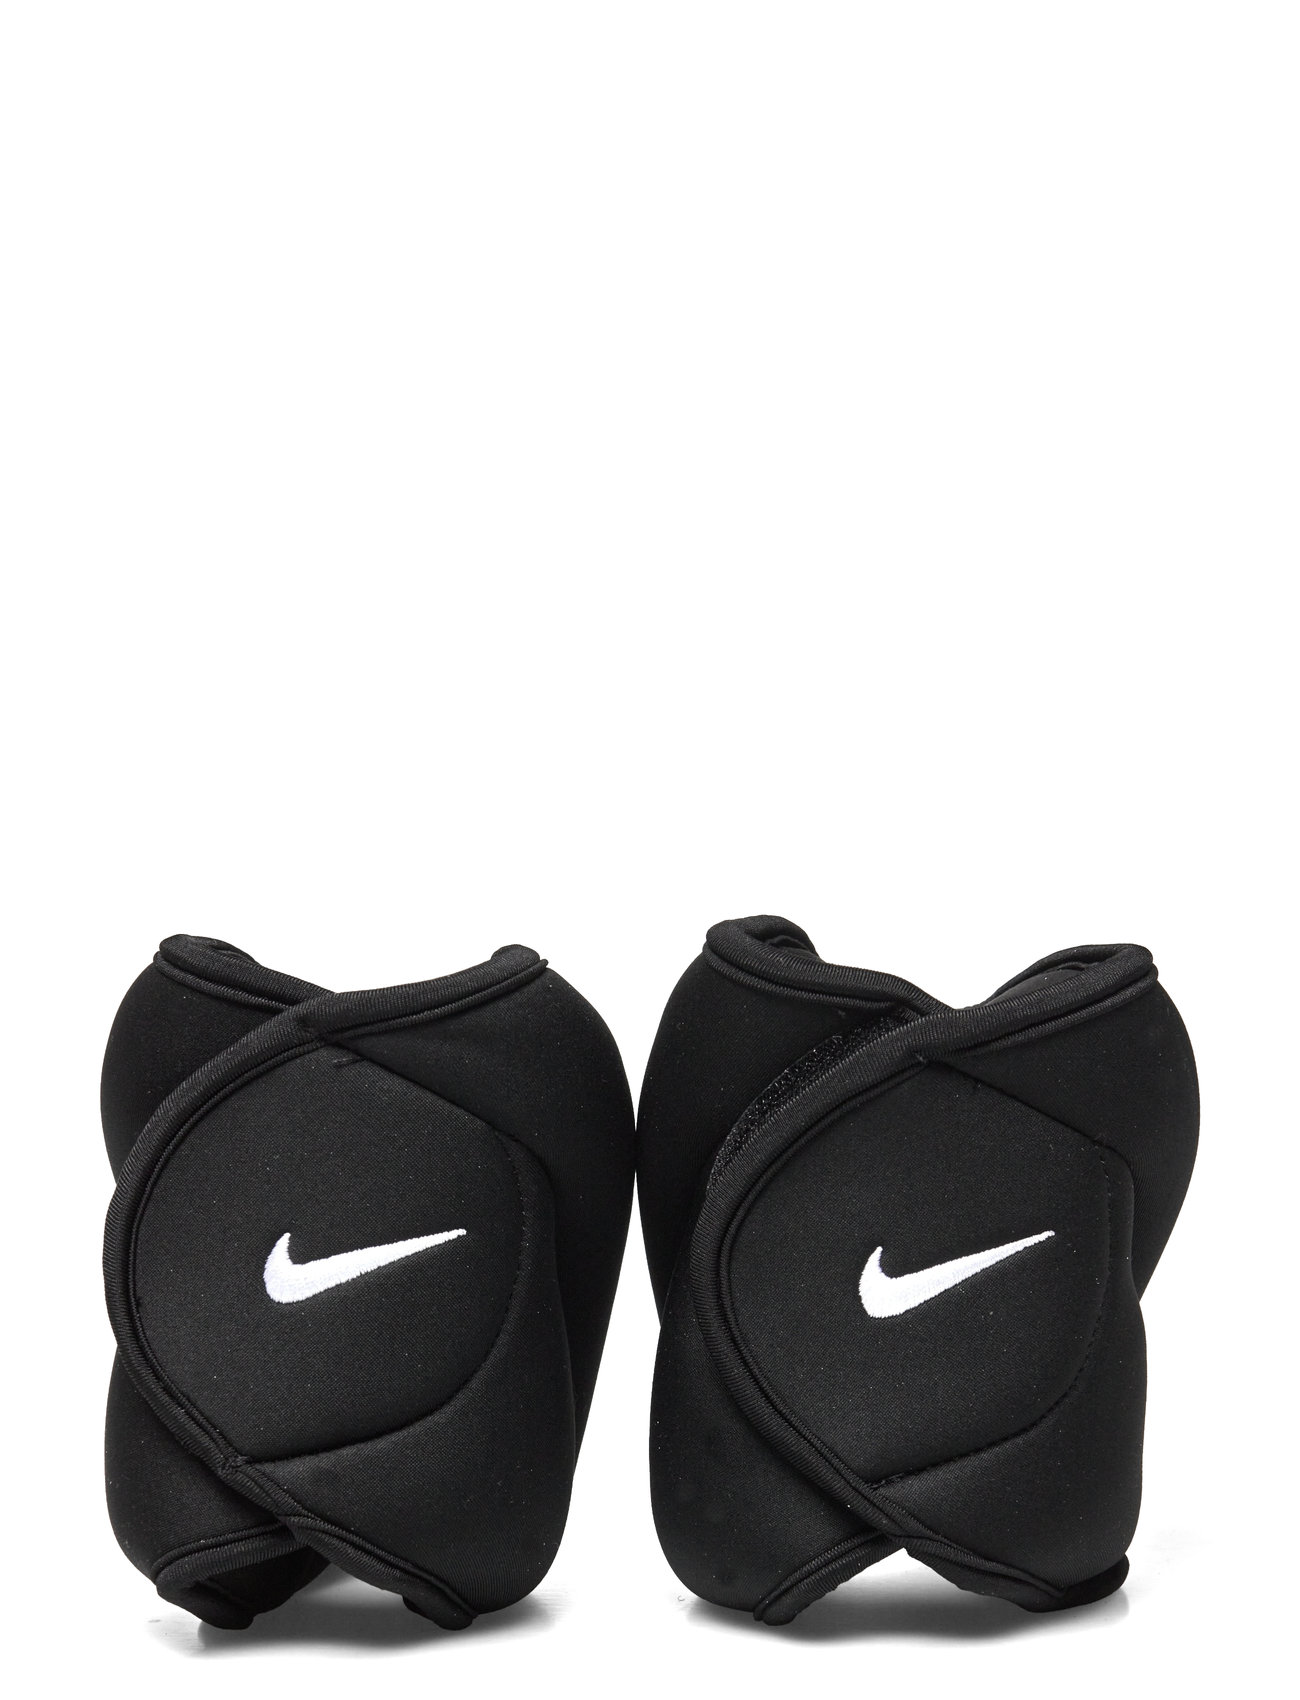 Nike Ankle Weights 5 Lb/2.27 Kg Each Sport Sports Equipment Braces & Supports Ankle Support Black NIKE Equipment